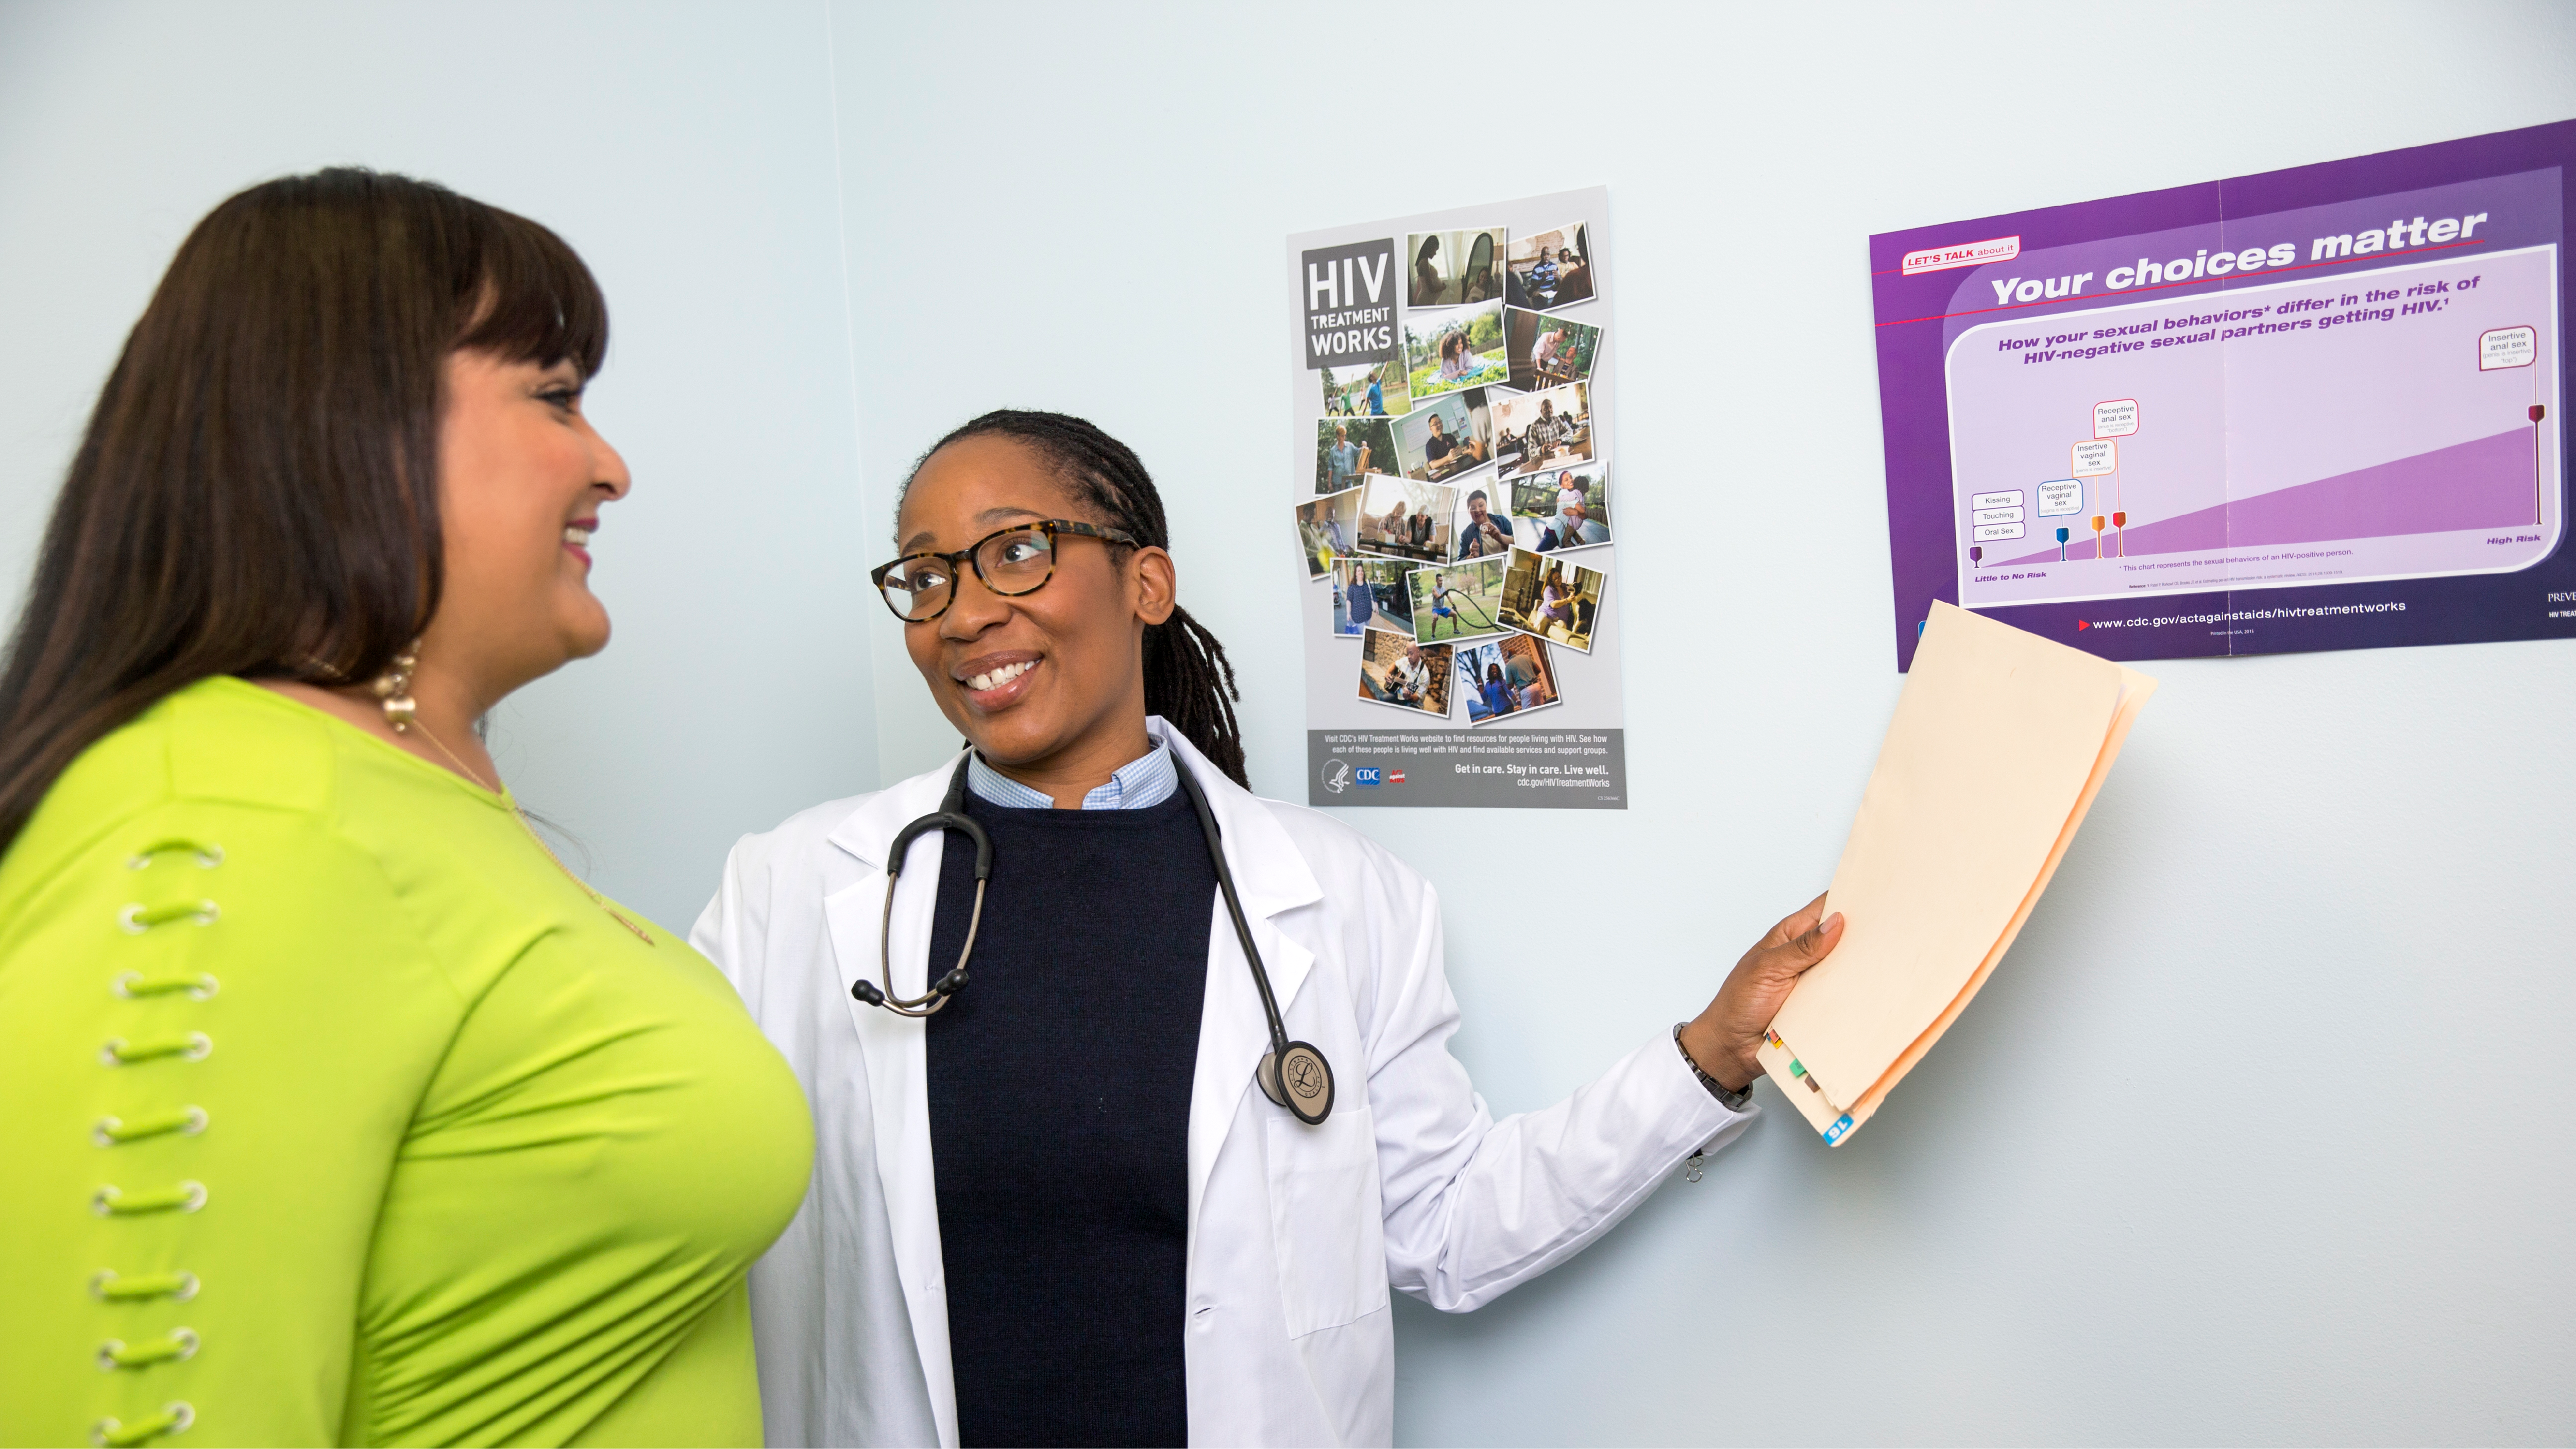 A health care provider talking to a patient while pointing to wall poster with information about HIV.